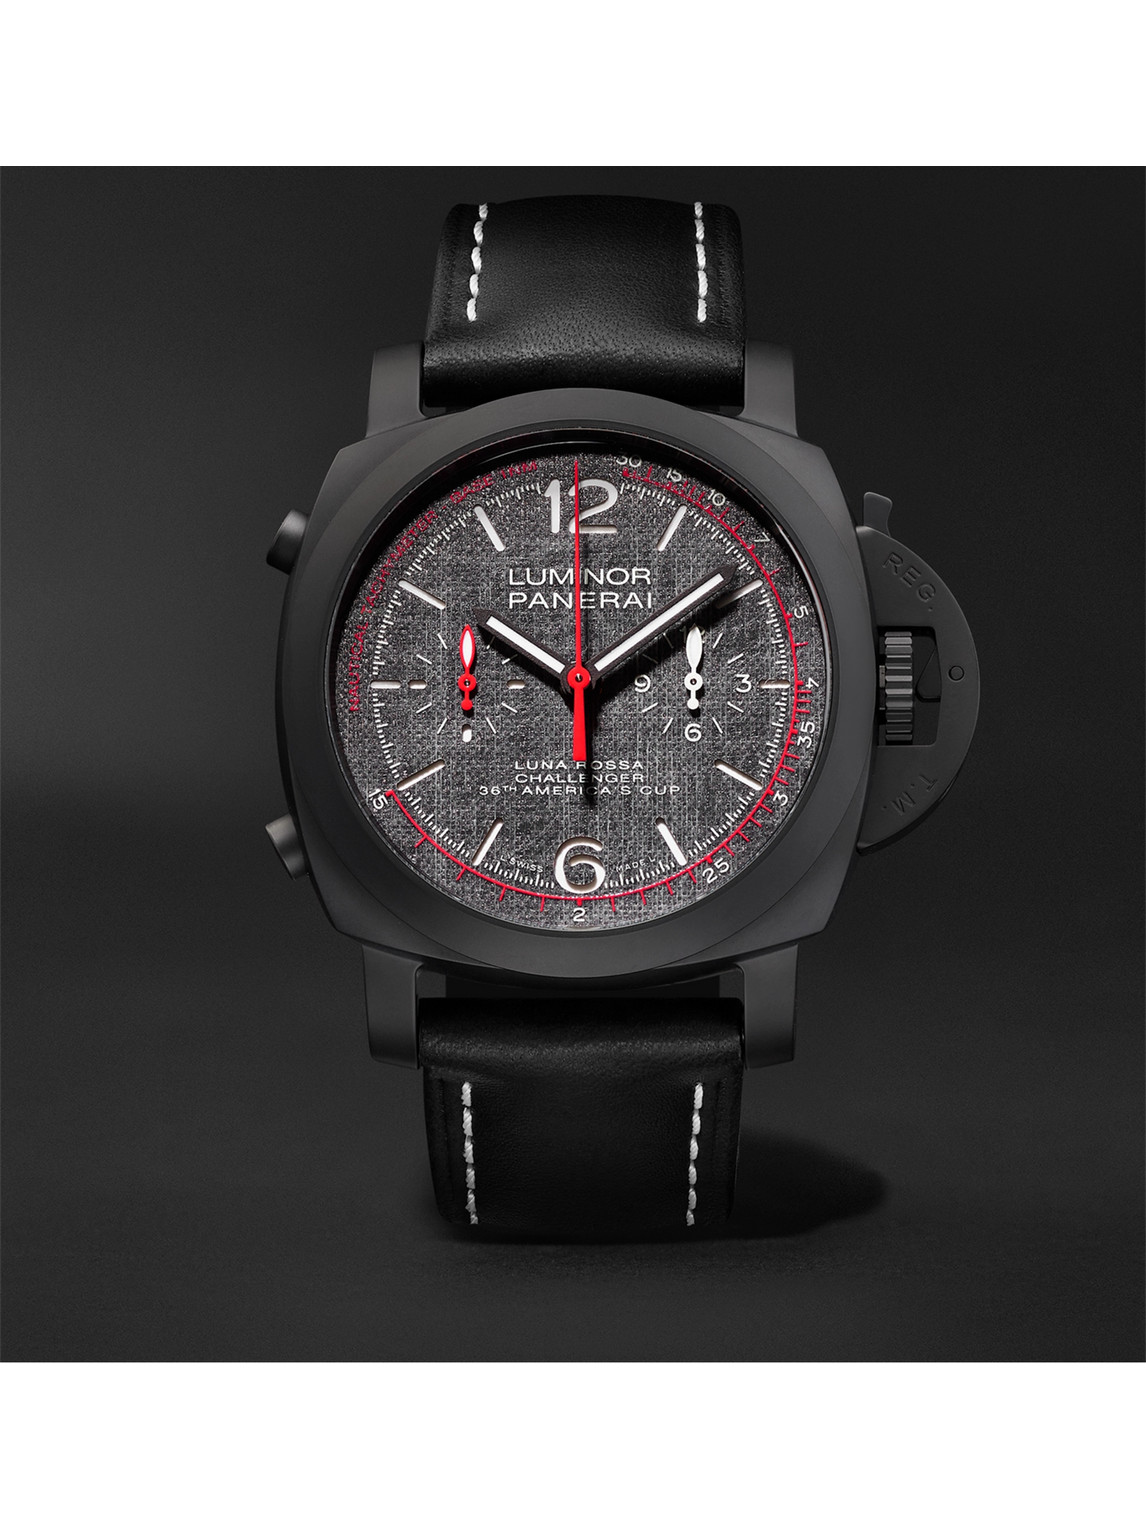 Panerai Luminor Luna Rossa Automatic Flyback Chronograph 44mm Ceramic And Leather Watch, Ref. No. Pam01037 In Black